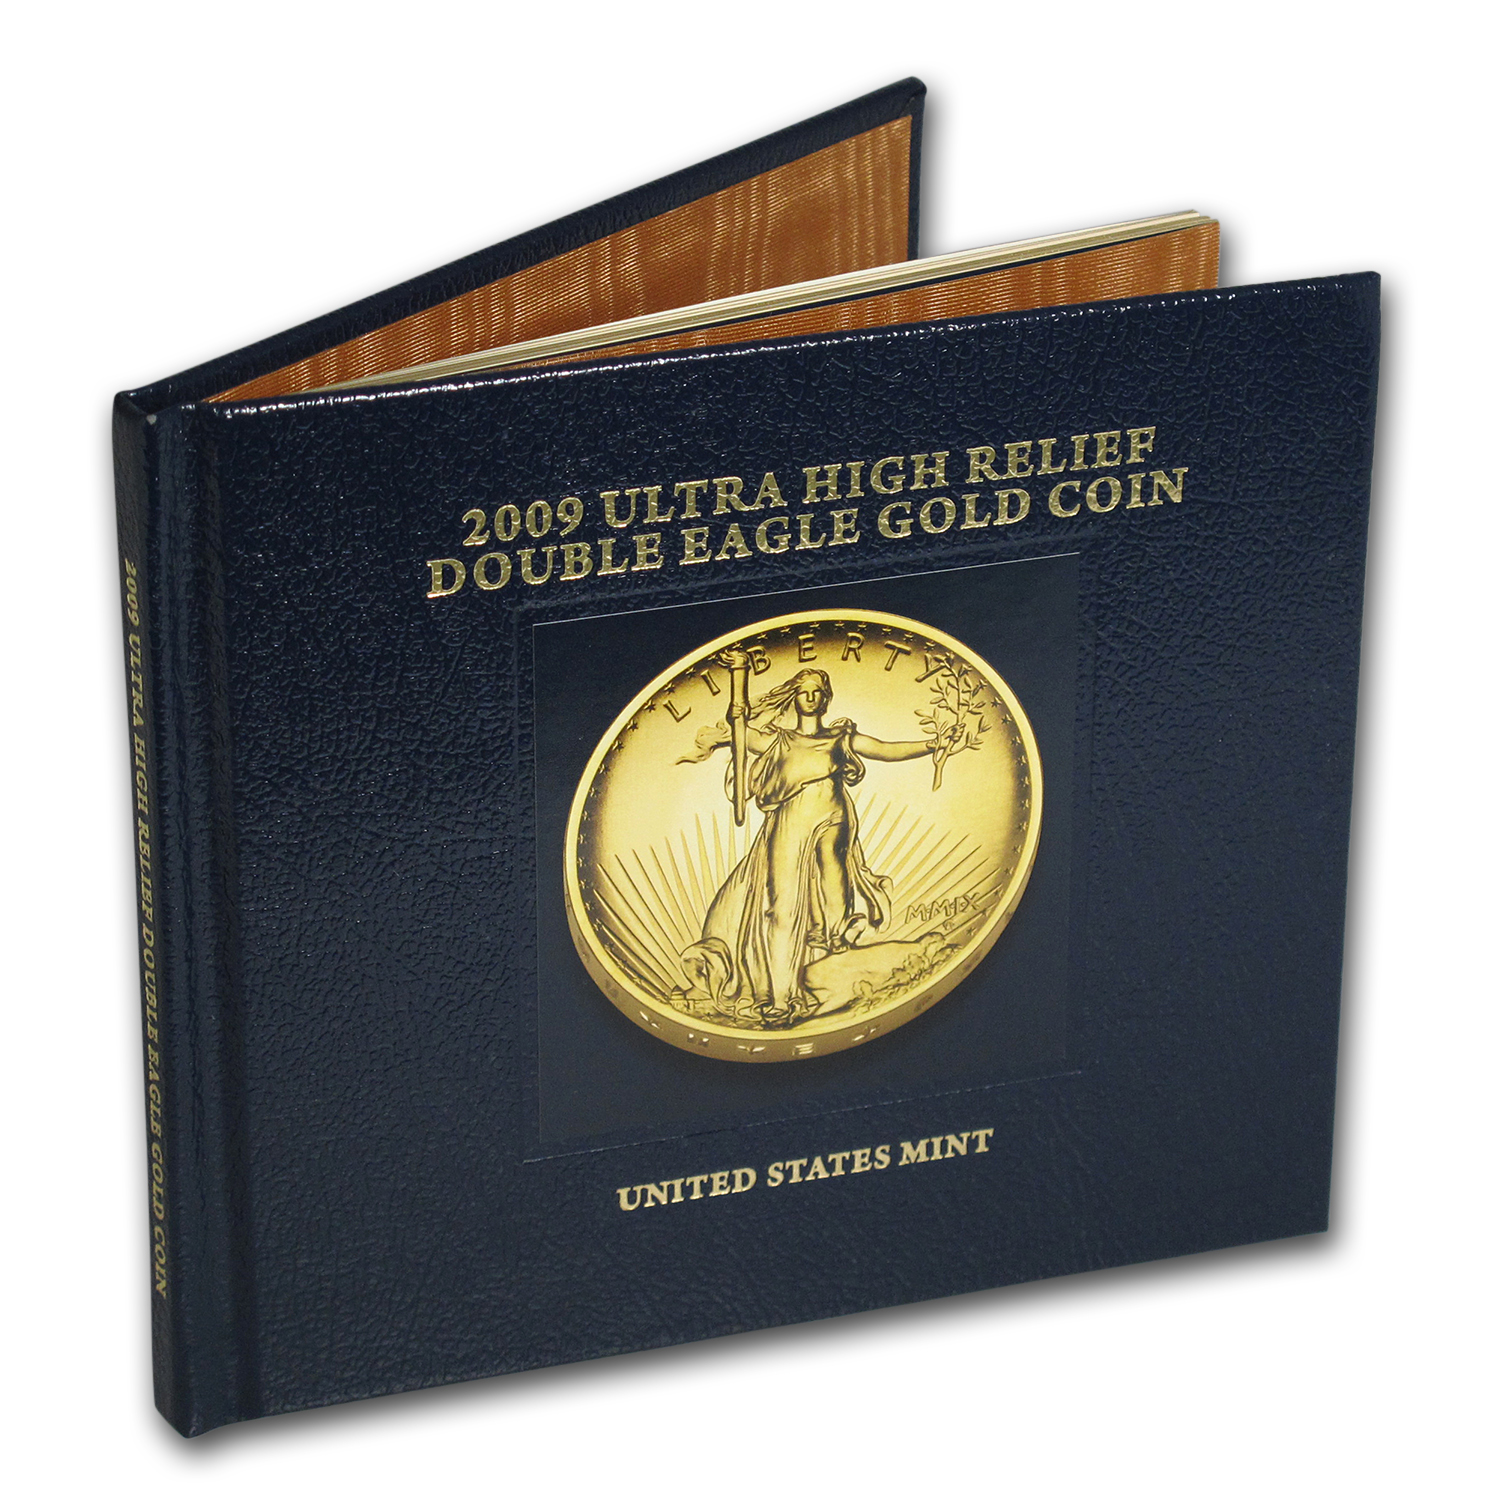 Buy OGP- 2009 Ultra High Relief Double Eagle Gold Coin Book